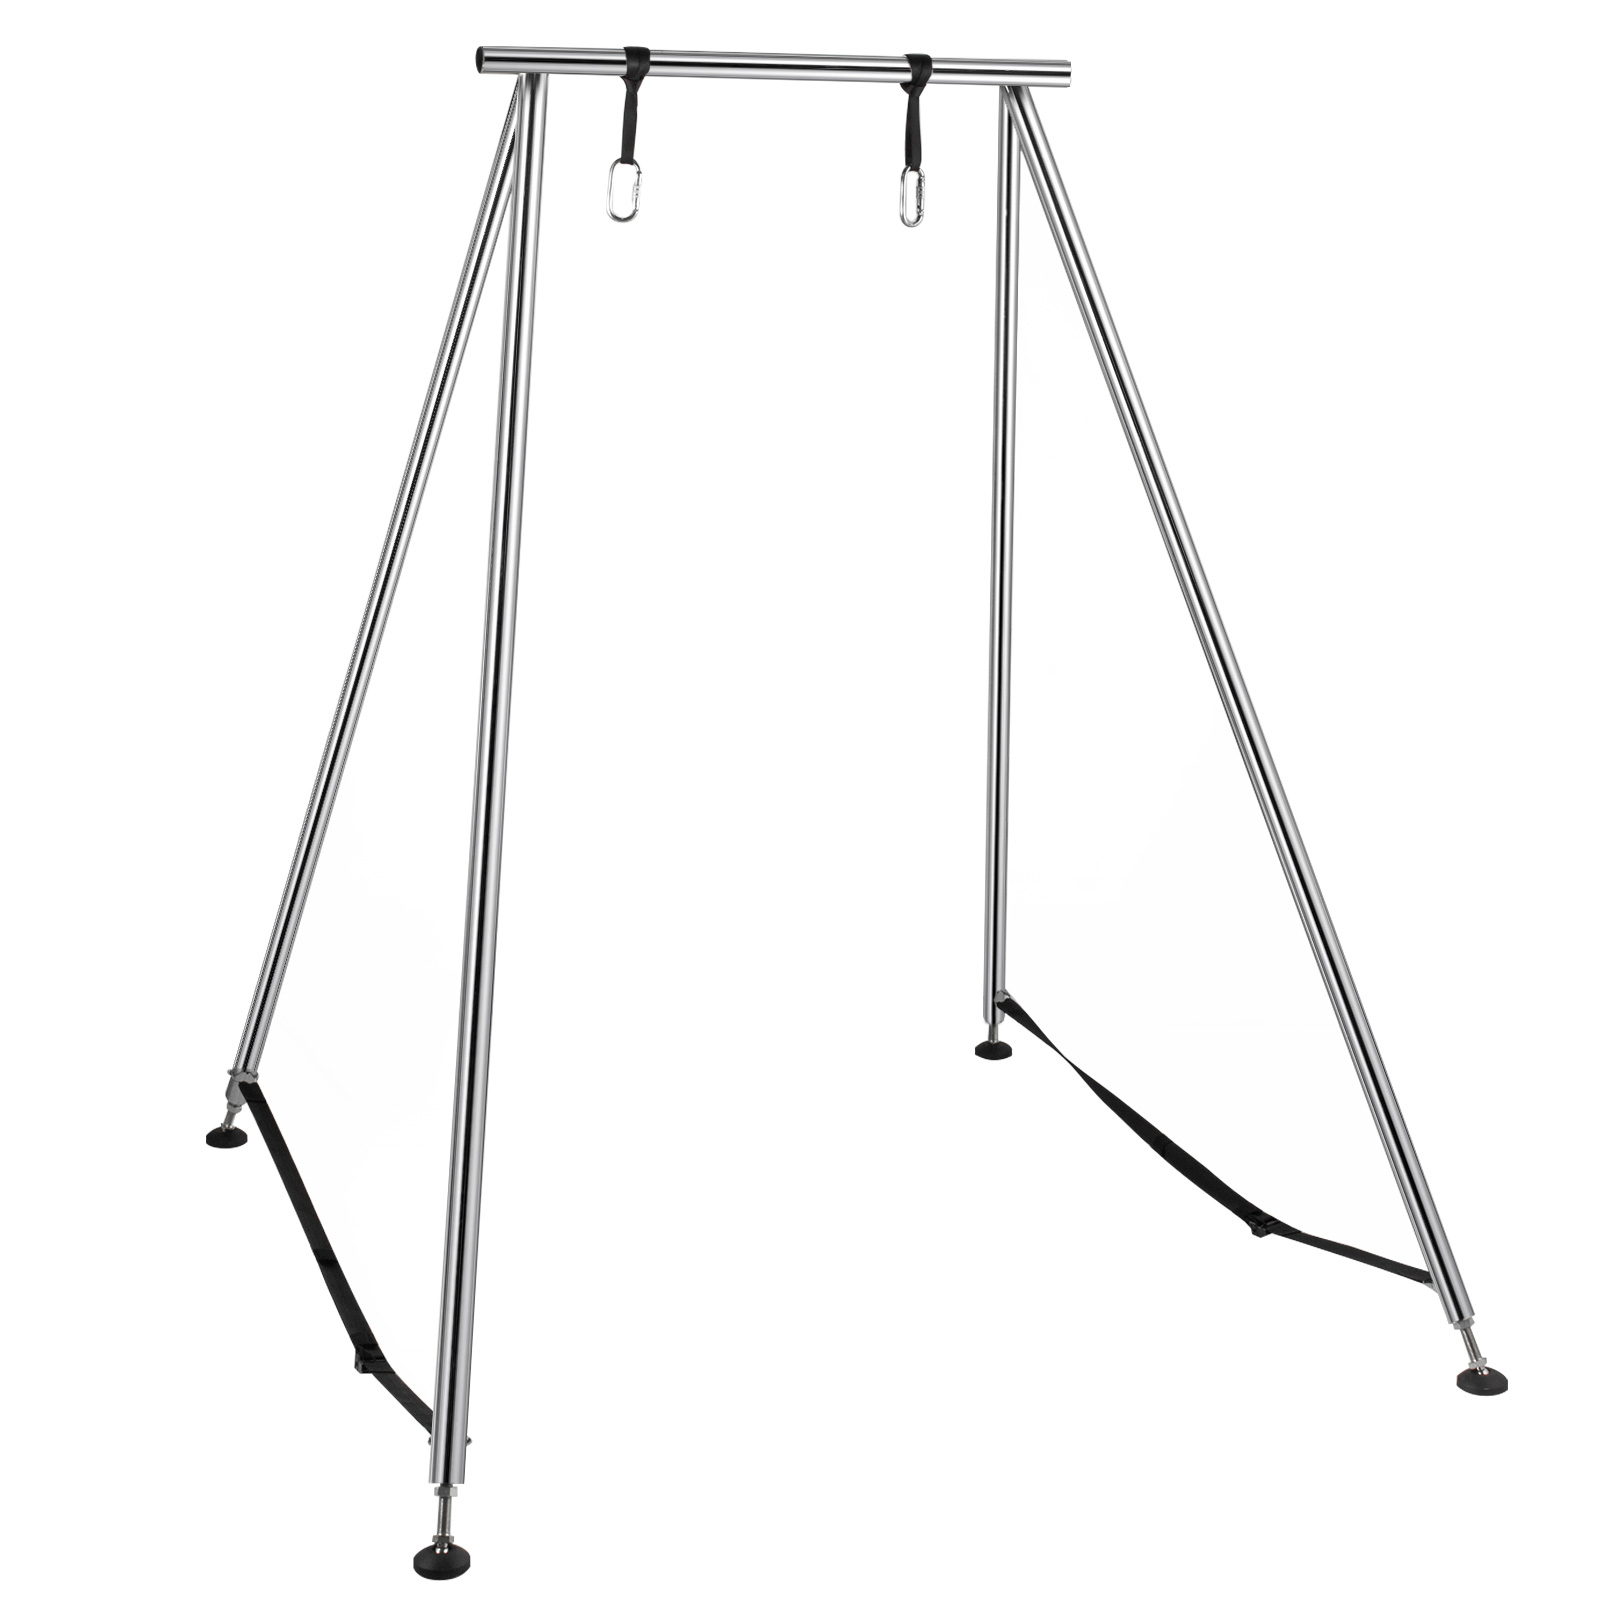  Yoga Trapeze Versatile Fitness Yoga Stand for Home & Outdoor, Easy 5-Min Setup, Supports Yoga Aerial Silks, Swings, Hammocks, Olympic  Rings